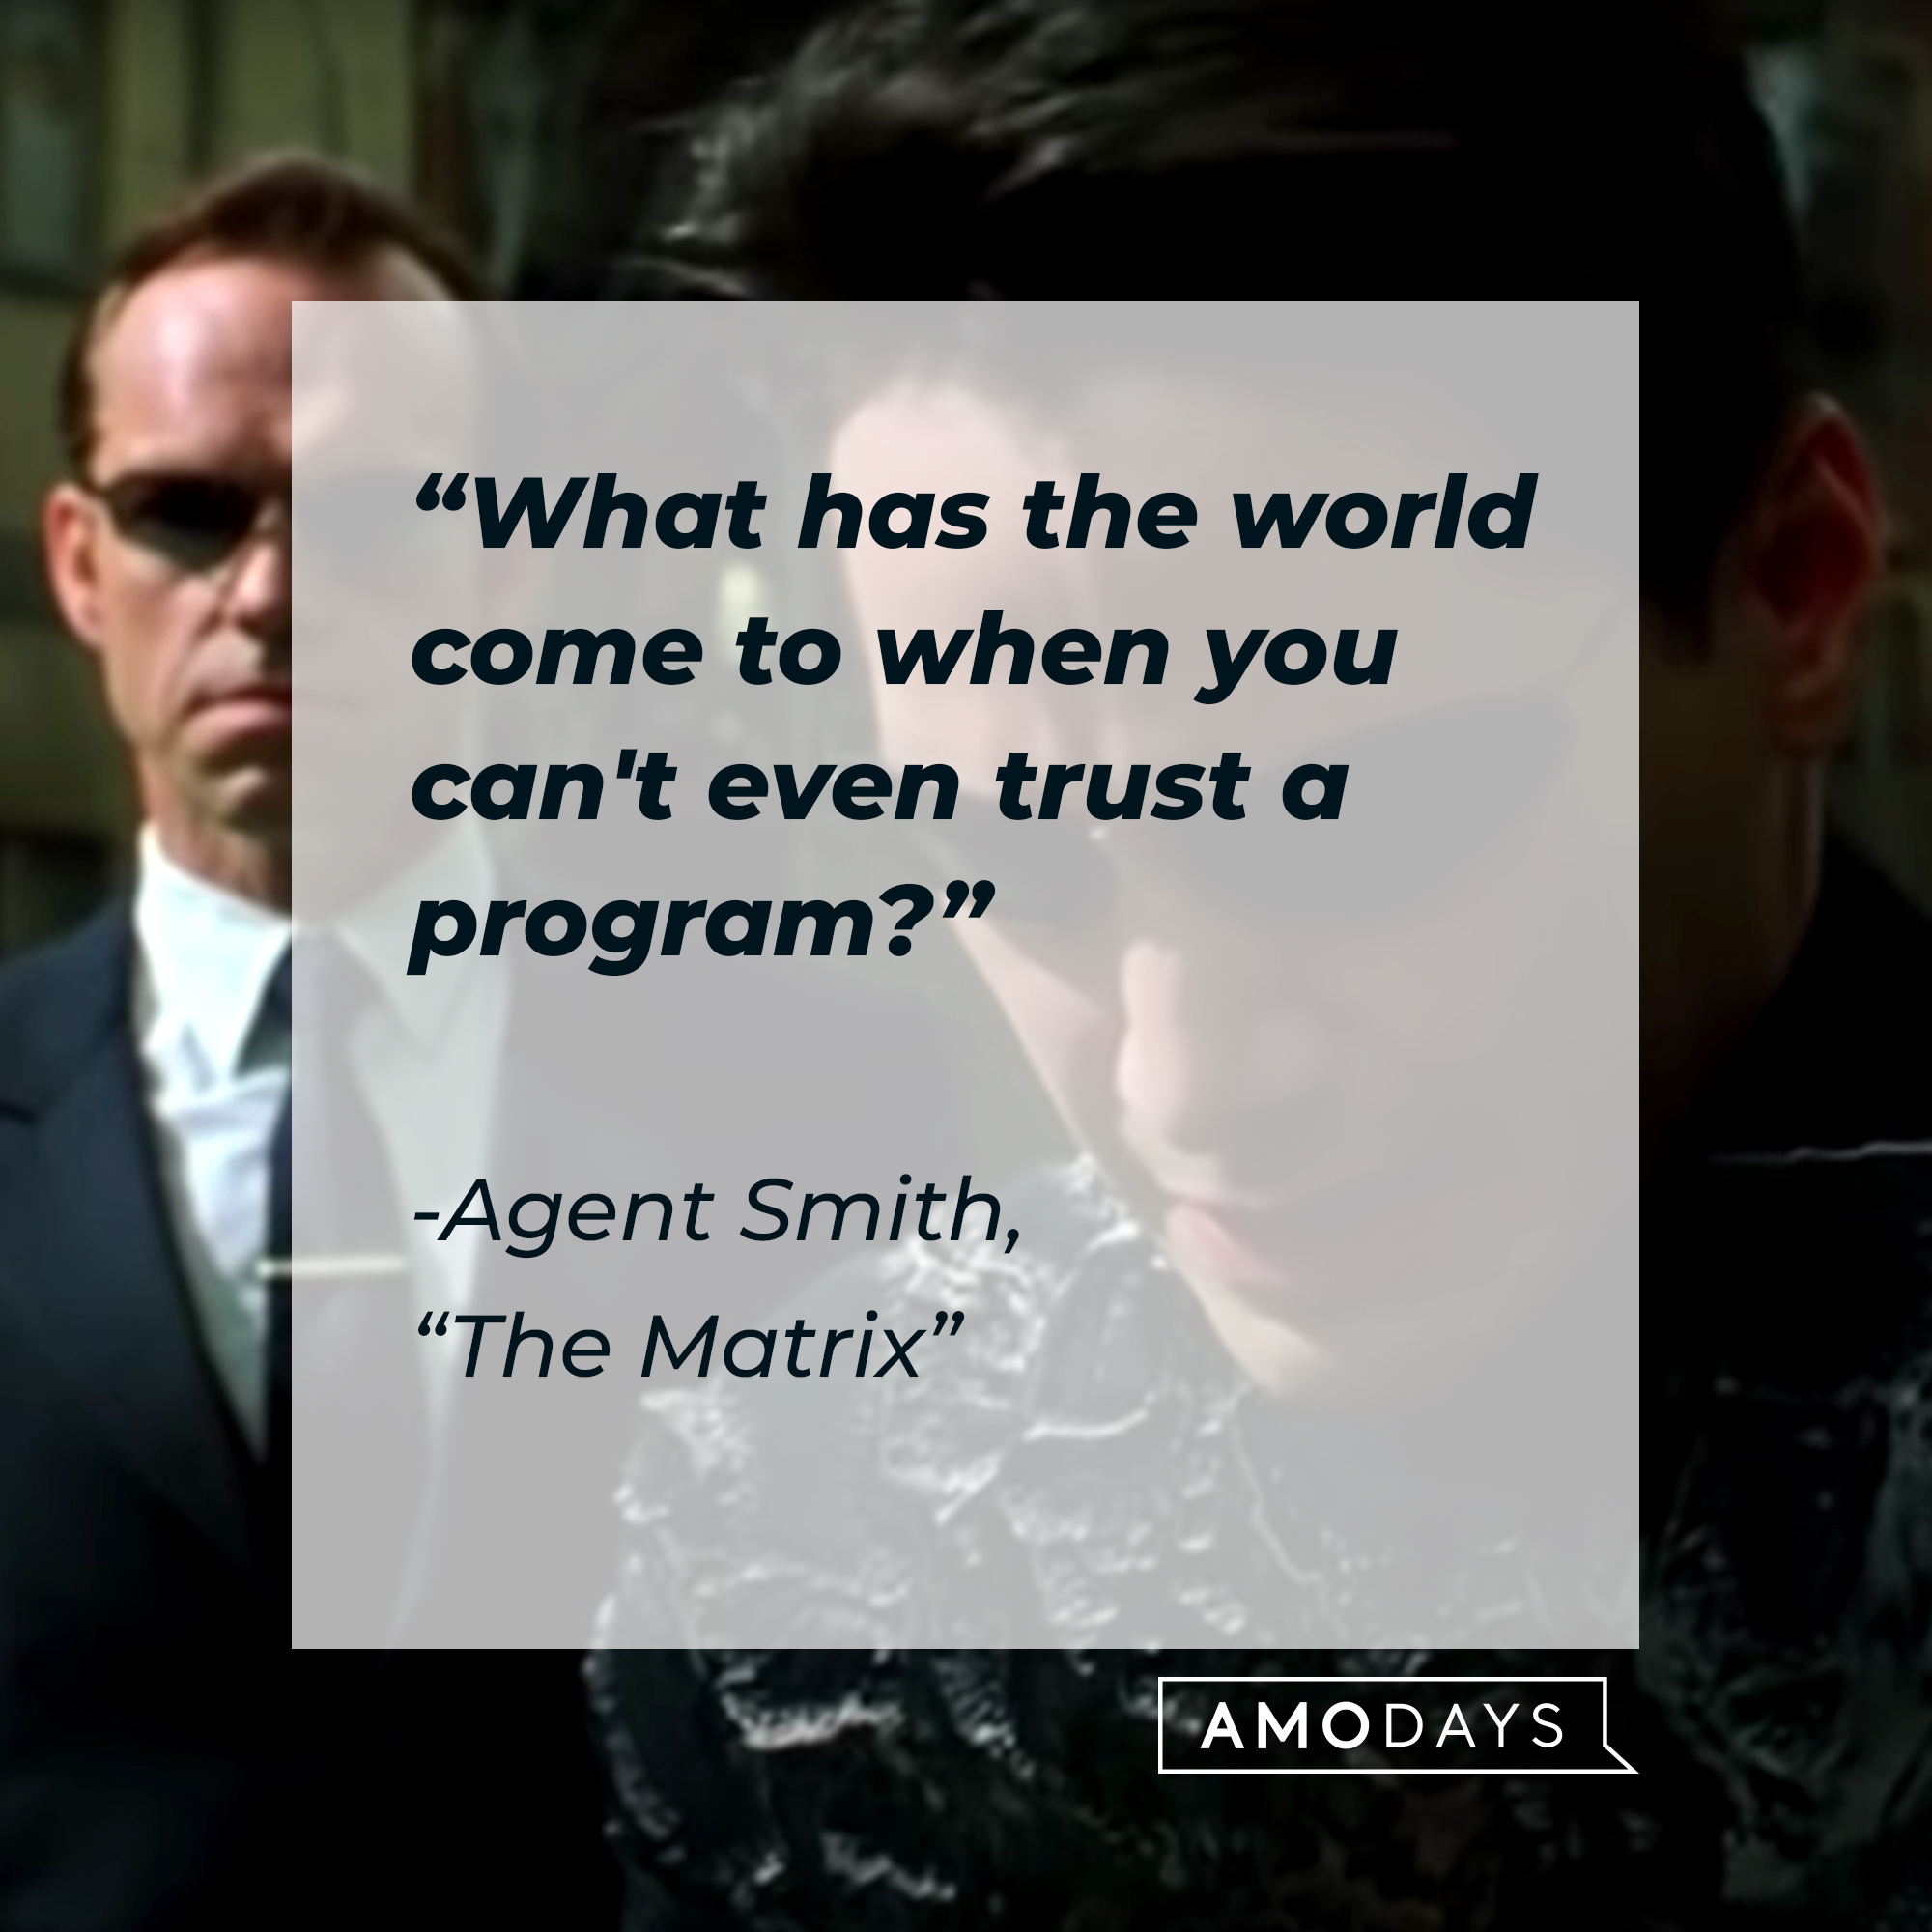 Agent Smith with his quote: "What has the world come to when you can't even trust a program?" | Source: Facebook.com/TheMatrixMovie